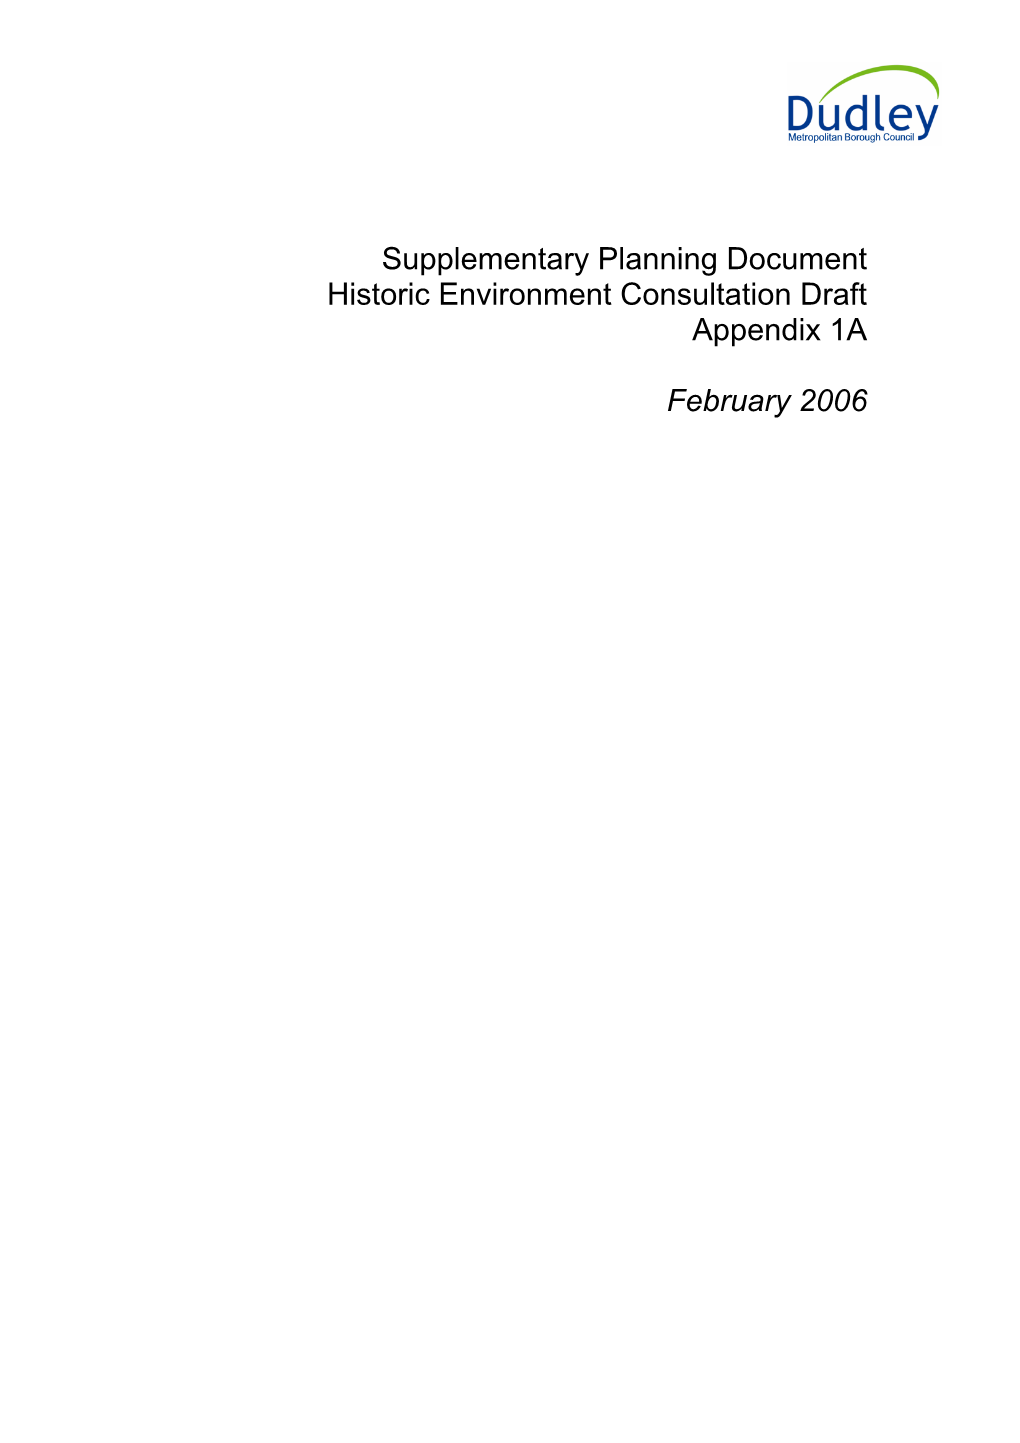 Supplementary Planning Document Historic Environment Consultation Draft Appendix 1A